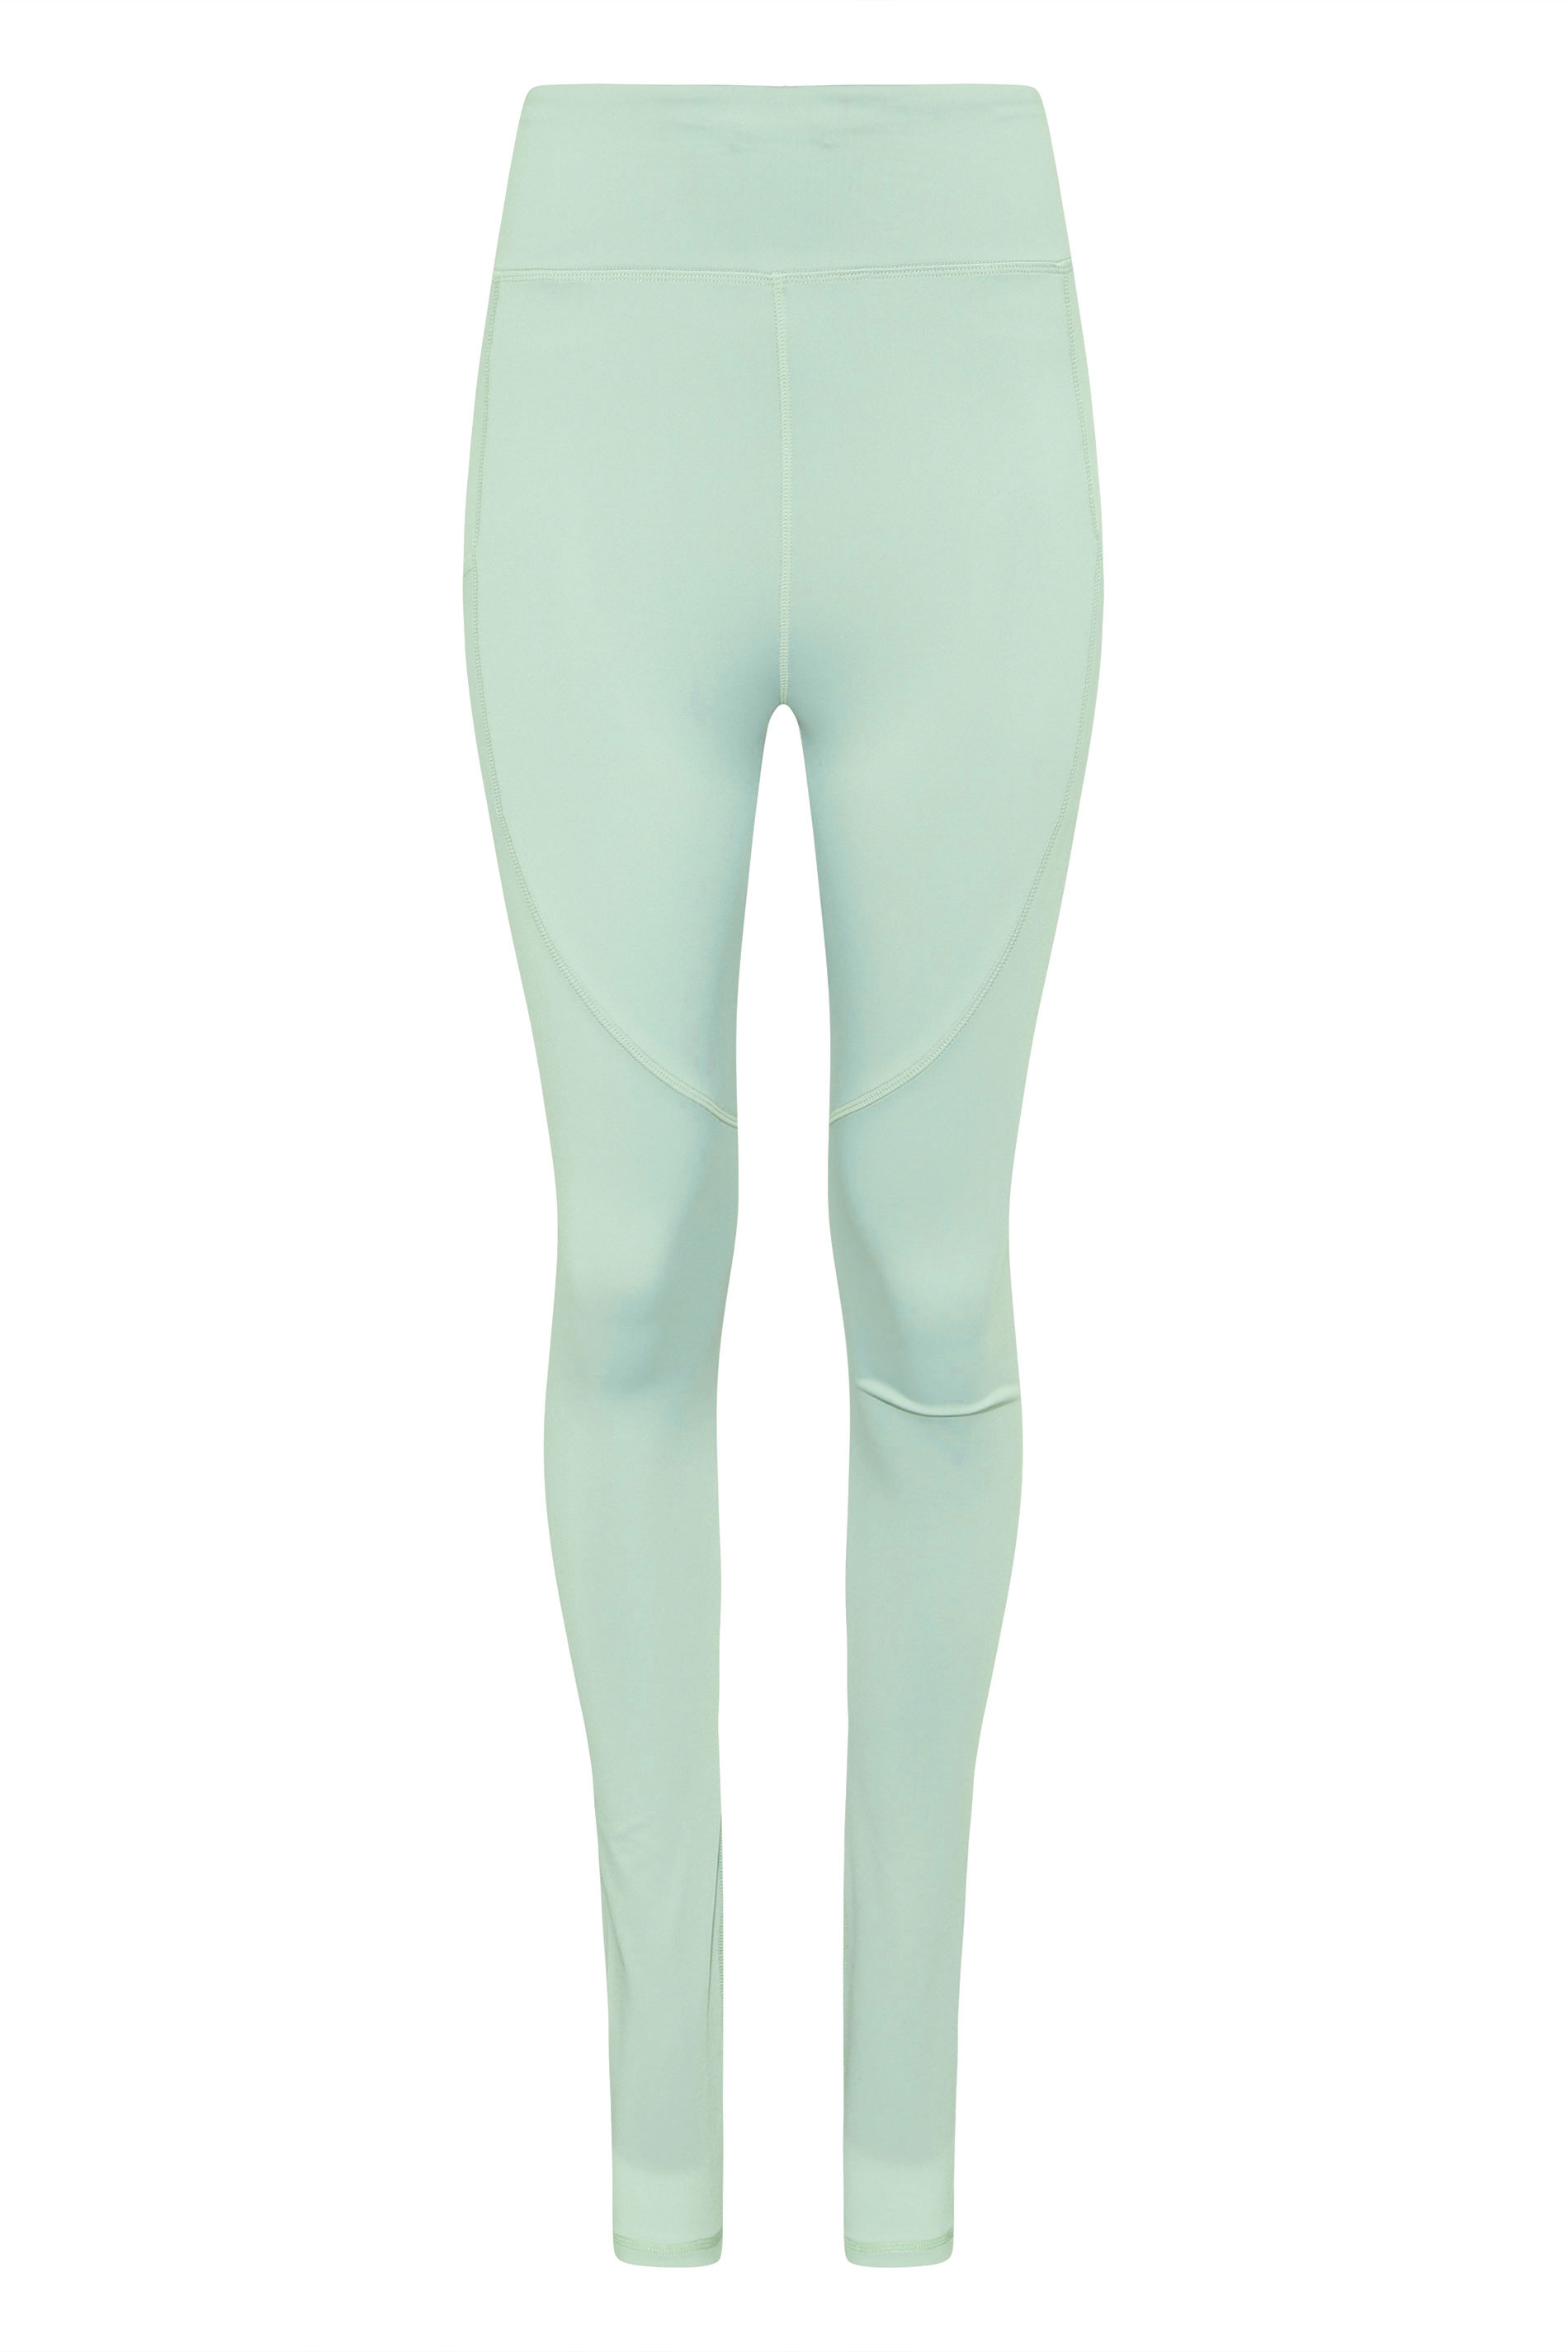 Tall Women's LTS ACTIVE Sage Green High Waisted Gym Leggings | Long ...